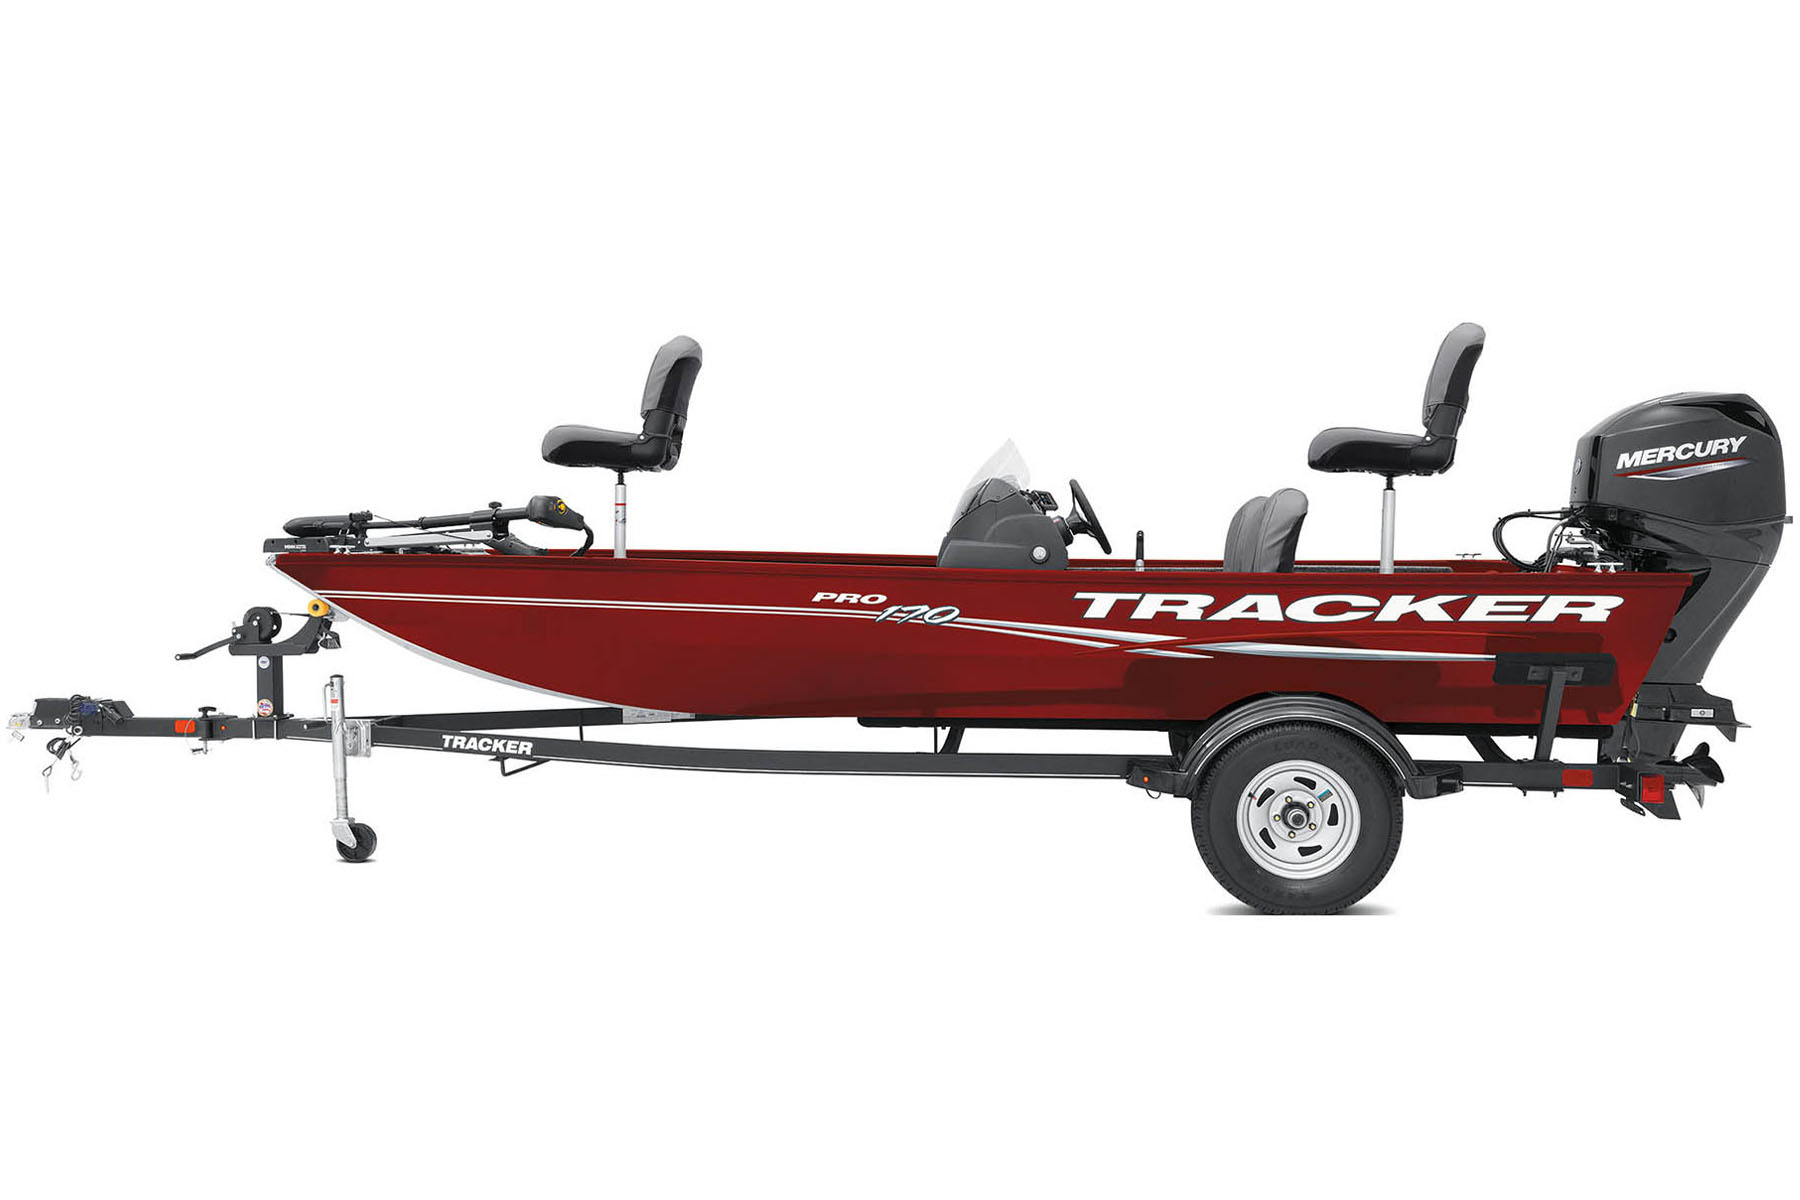 Engines For Sale - PRO Boats